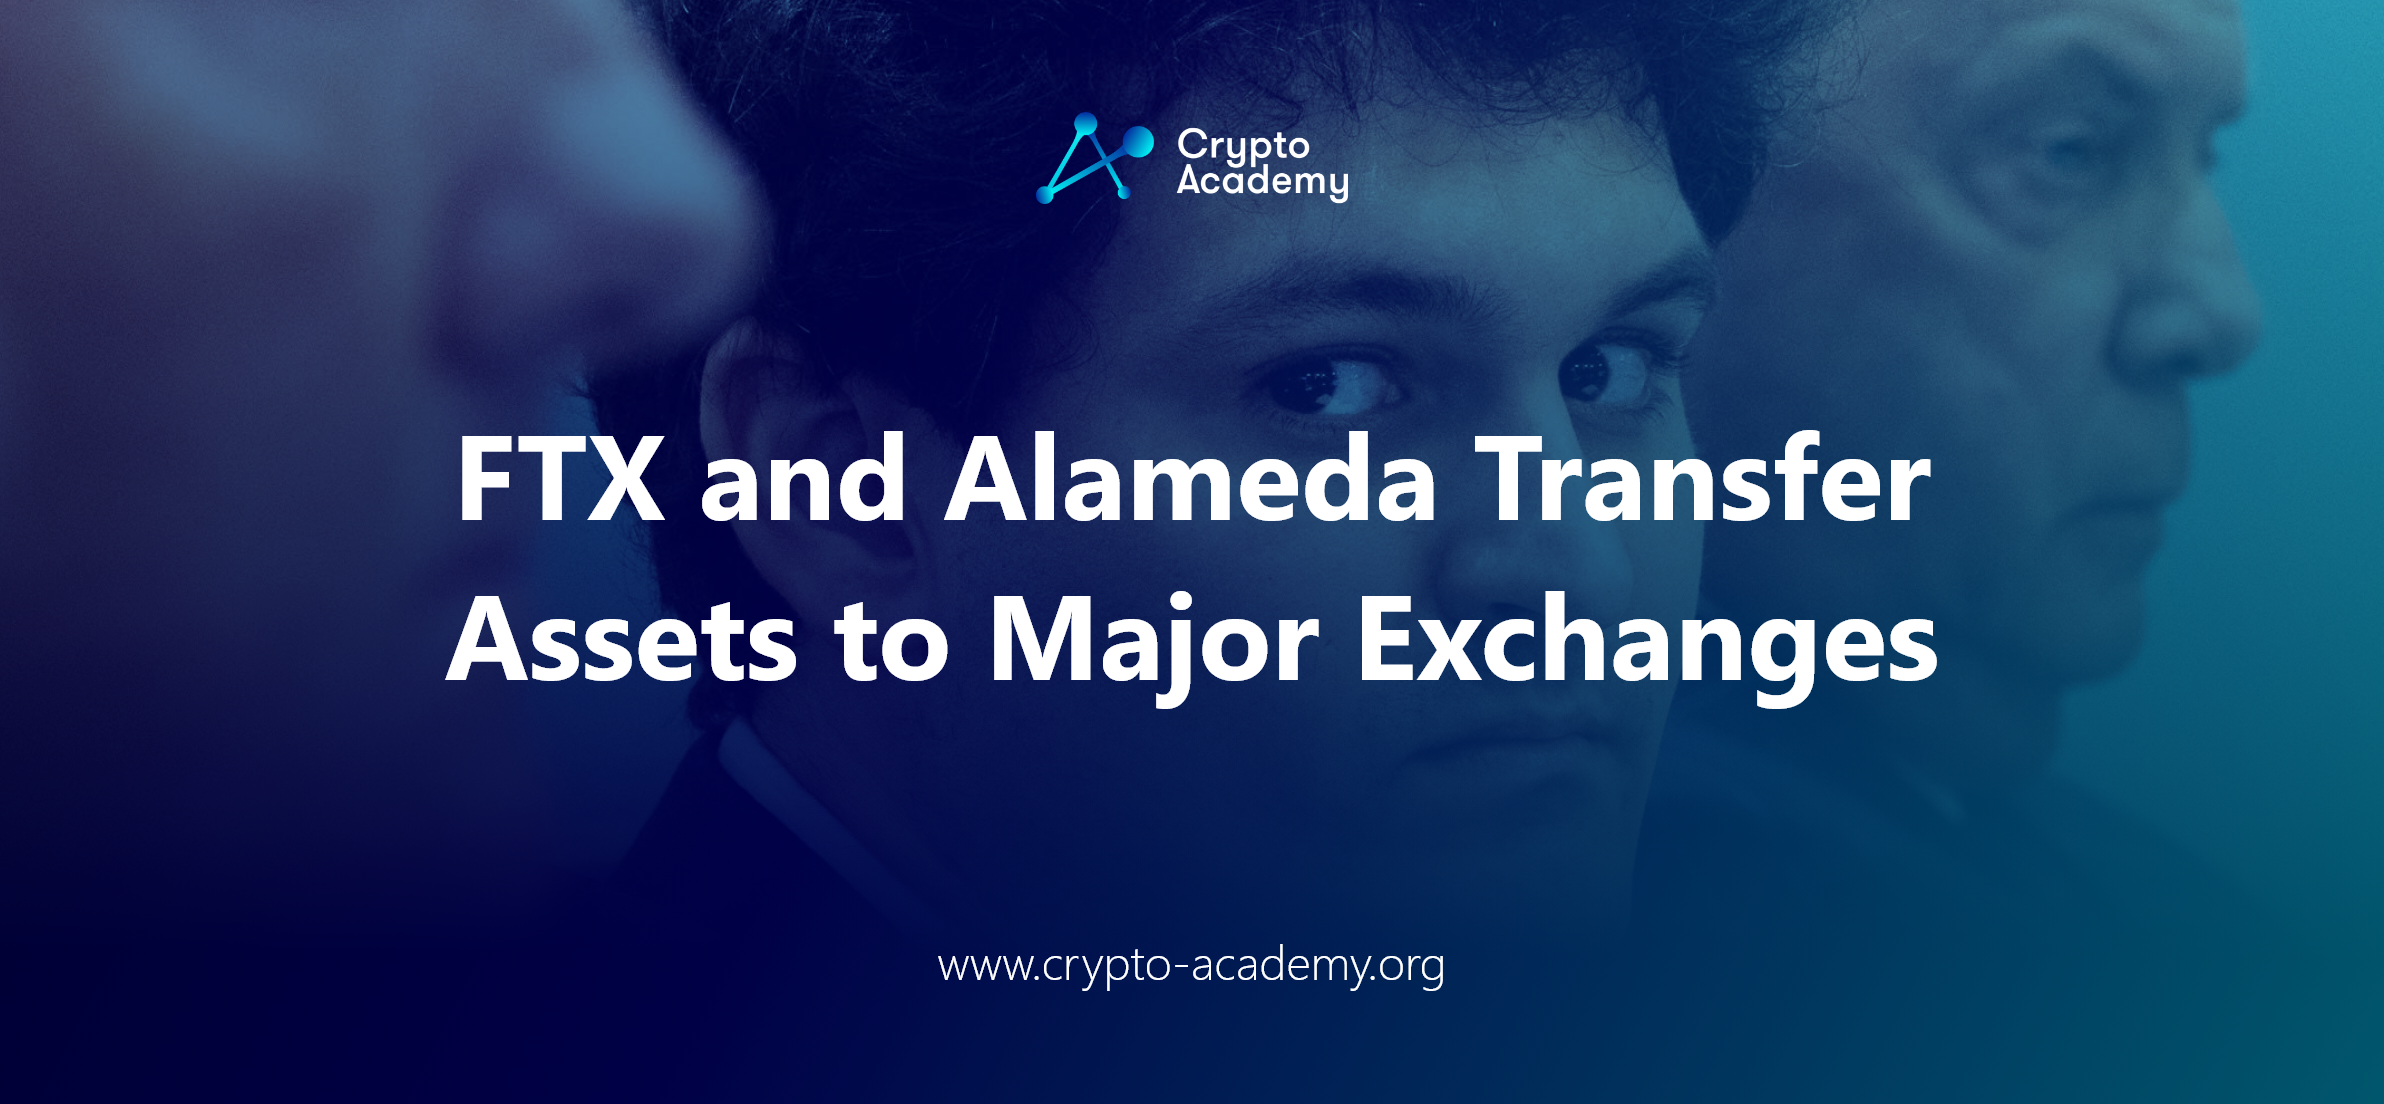 FTX and Alameda Transfer Assets to Major Exchanges